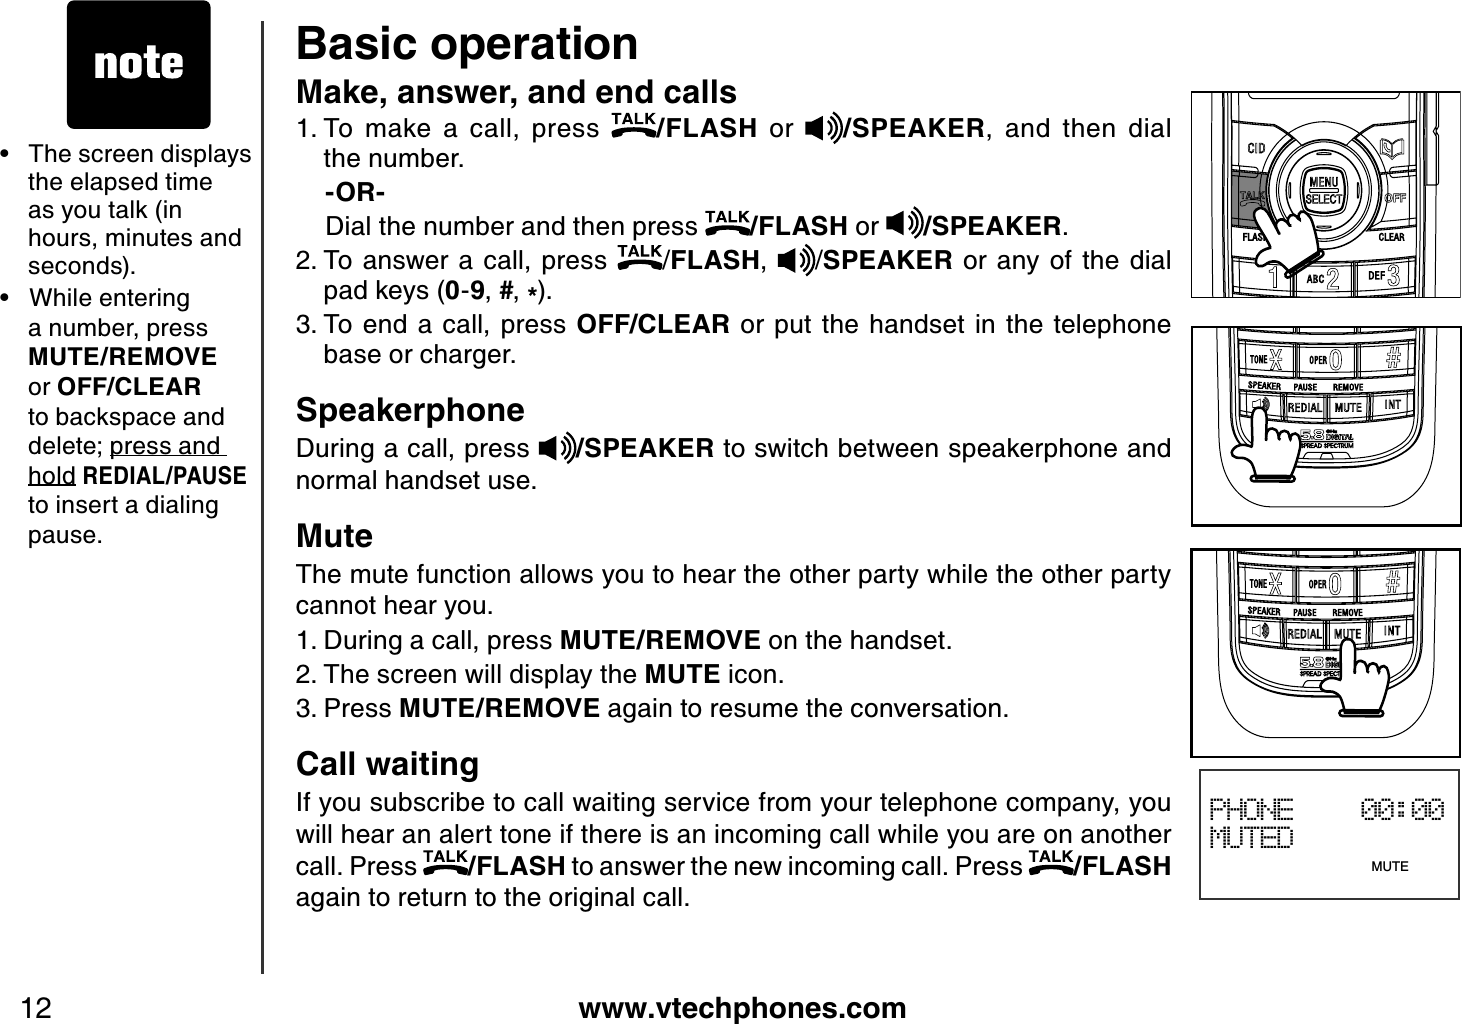 www.vtechphones.com12Basic operationMake, answer, and end calls To  make  a  call,  press  /FLASH  or  /SPEAKER,  and  then  dial             the number.-OR-Dial the number and then press  /FLASH or  /SPEAKER.To answer a call,  press  /FLASH, /SPEAKER  or  any of the  dial pad keys (0-9,#,*).To end a call,  press  OFF/CLEAR  or put  the  handset  in the telephone base or charger.SpeakerphoneDuring a call, press  /SPEAKER to switch between speakerphone and normal handset use.MuteThe mute function allows you to hear the other party while the other party cannot hear you.During a call, press MUTE/REMOVE on the handset.The screen will display the MUTE icon.Press MUTE/REMOVE again to resume the conversation.Call waitingIf you subscribe to call waiting service from your telephone company, you will hear an alert tone if there is an incoming call while you are on another call. Press  /FLASH to answer the new incoming call. Press  /FLASHagain to return to the original call.1.2.3.1.2.3.PHONE    00:00MUTED                              MUTE•   The screen displays the elapsed time as you talk (in hours, minutes and seconds).•   While entering a number, press MUTE/REMOVE or OFF/CLEARto backspace and delete; press and holdREDIAL/PAUSEto insert a dialing pause.